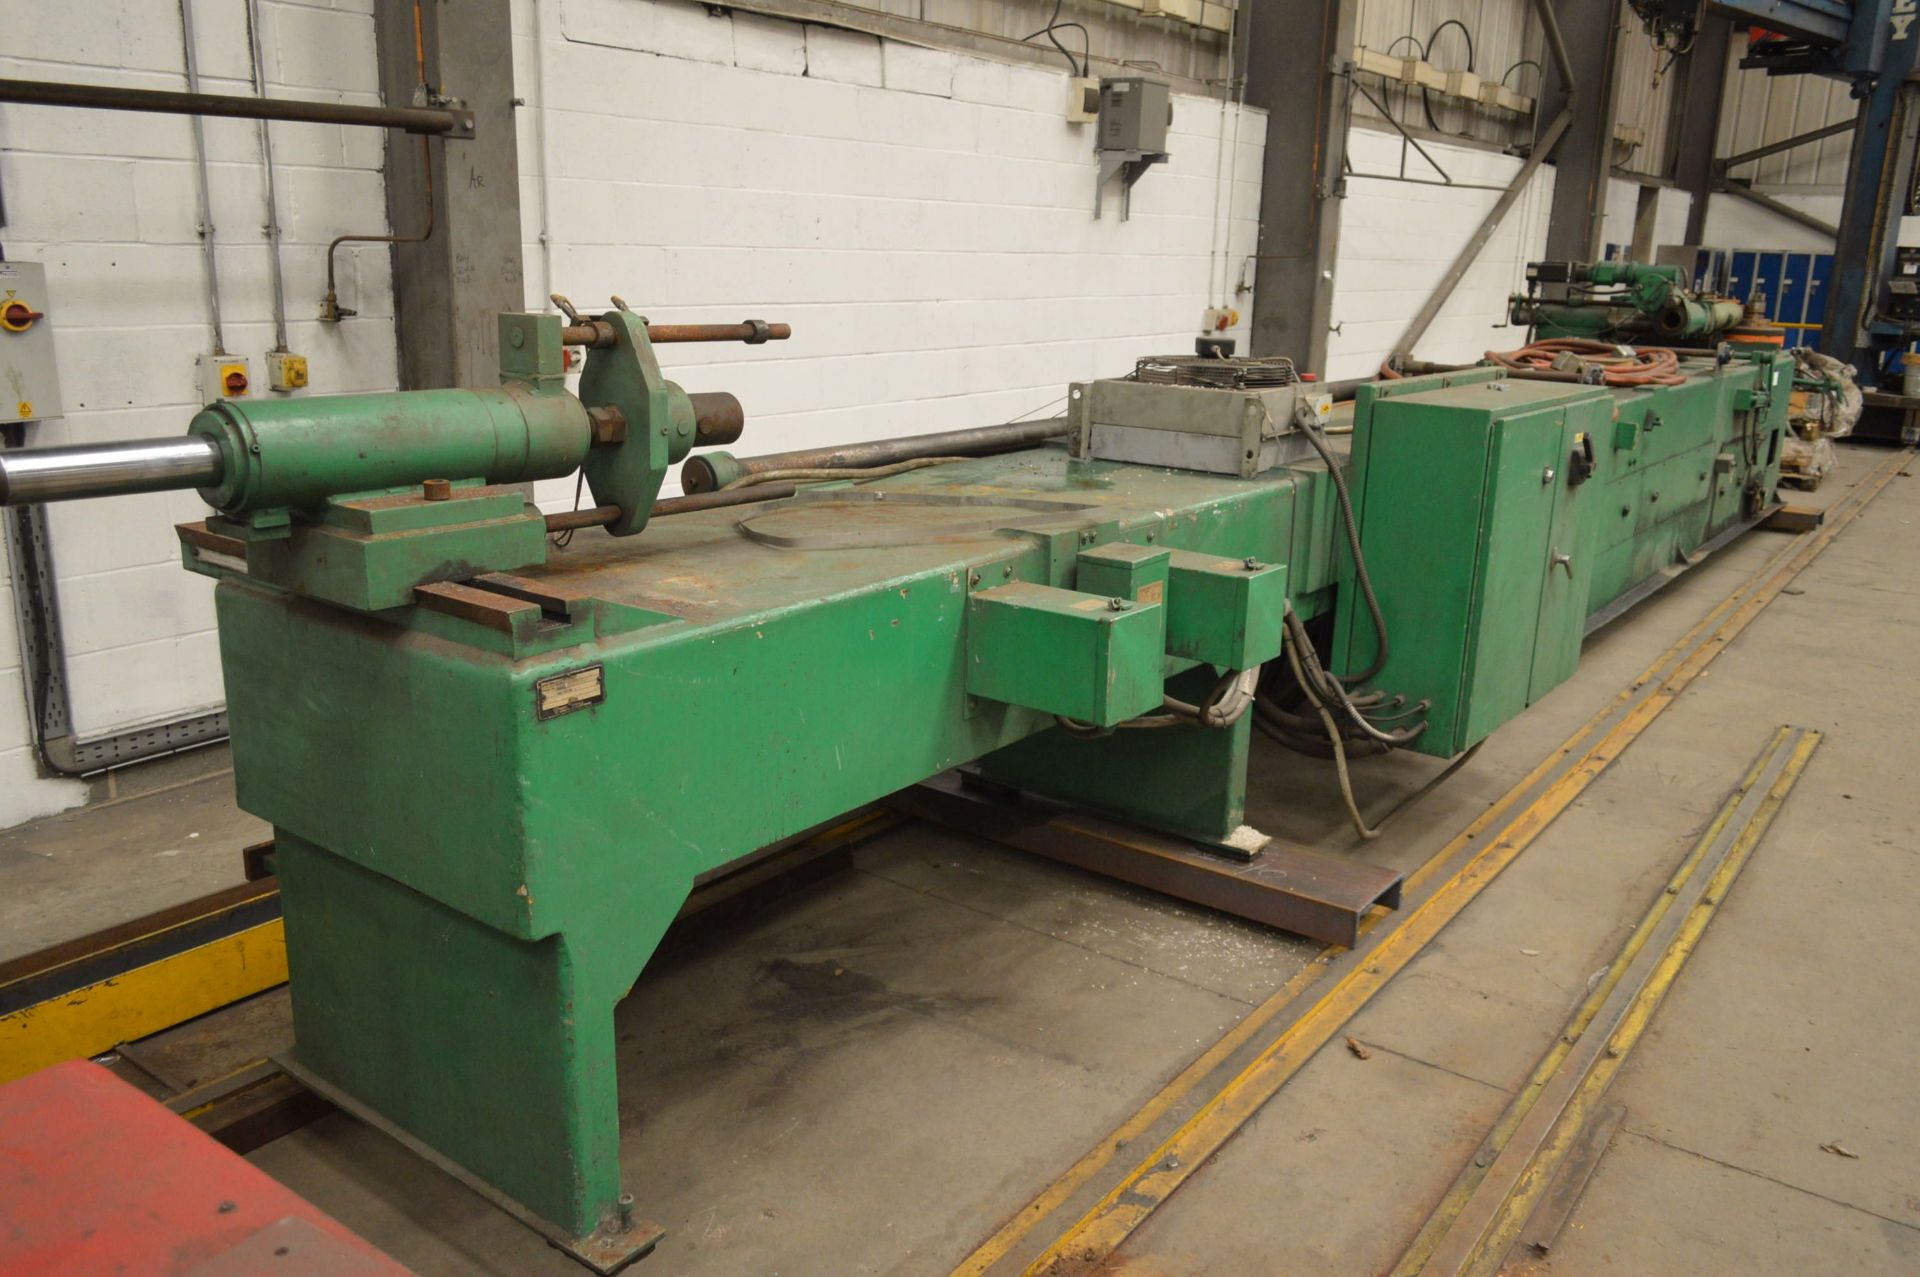 Schwarze-Wirtz CNC 80 DB CNC AUTOMATIC TUBE COLD BENDING MACHINE, serial no. 78804, understood to - Image 5 of 6